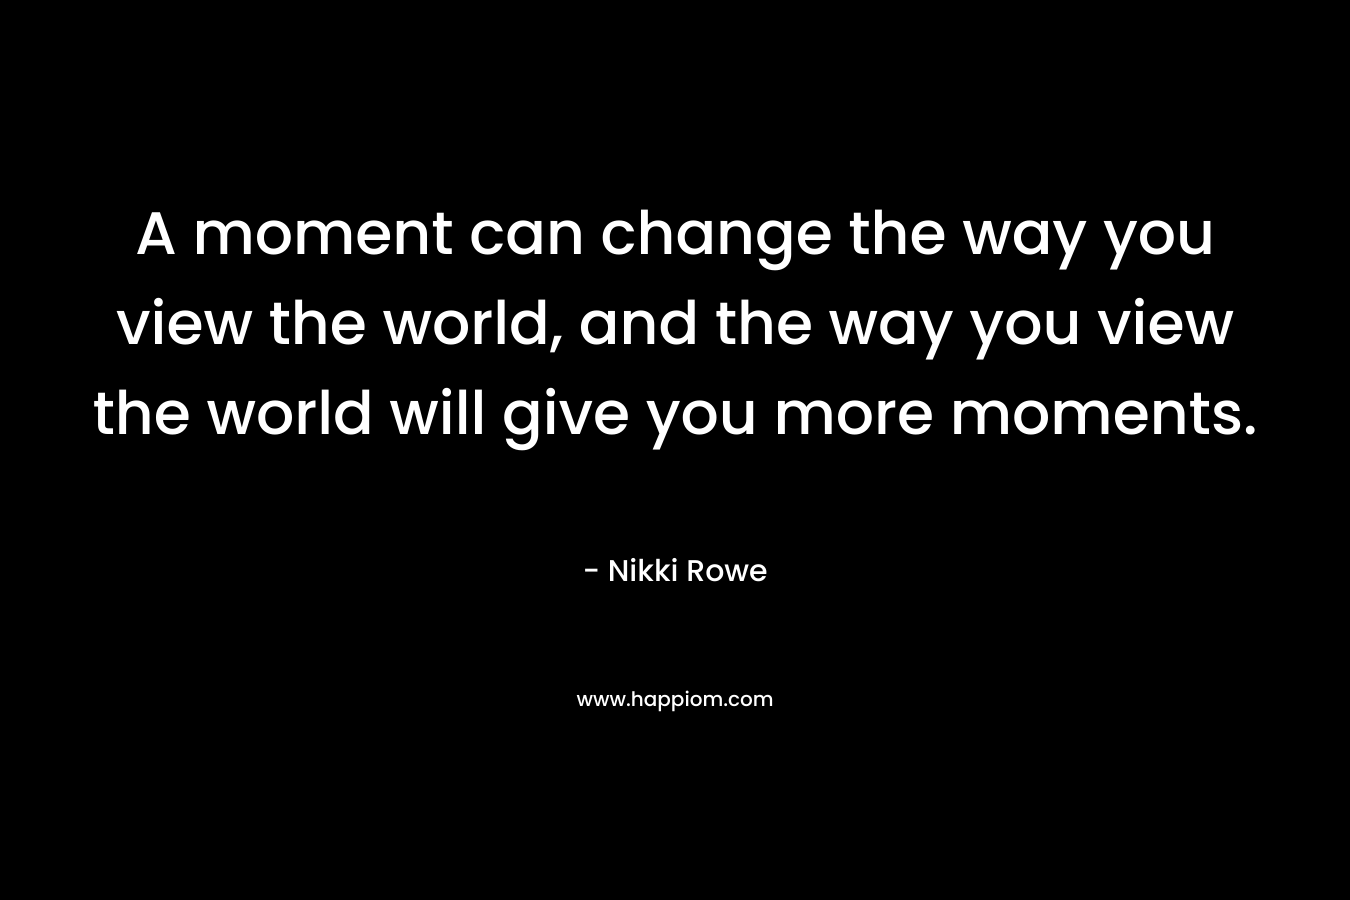 A moment can change the way you view the world, and the way you view the world will give you more moments.